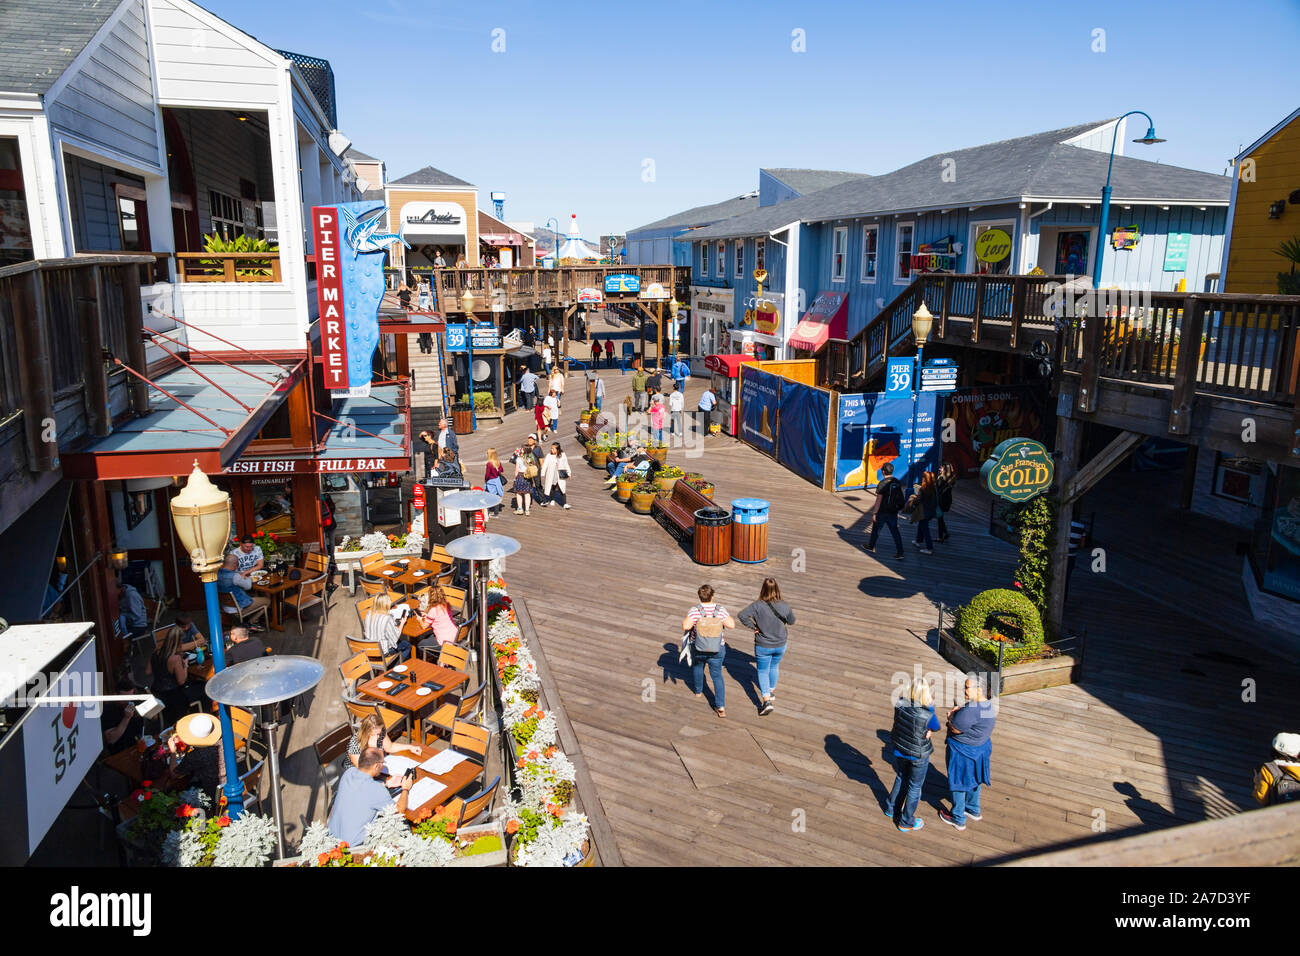 Attractions on Pier 39, Fishermans wharf, San Francisco, California United States of America Stock Photo